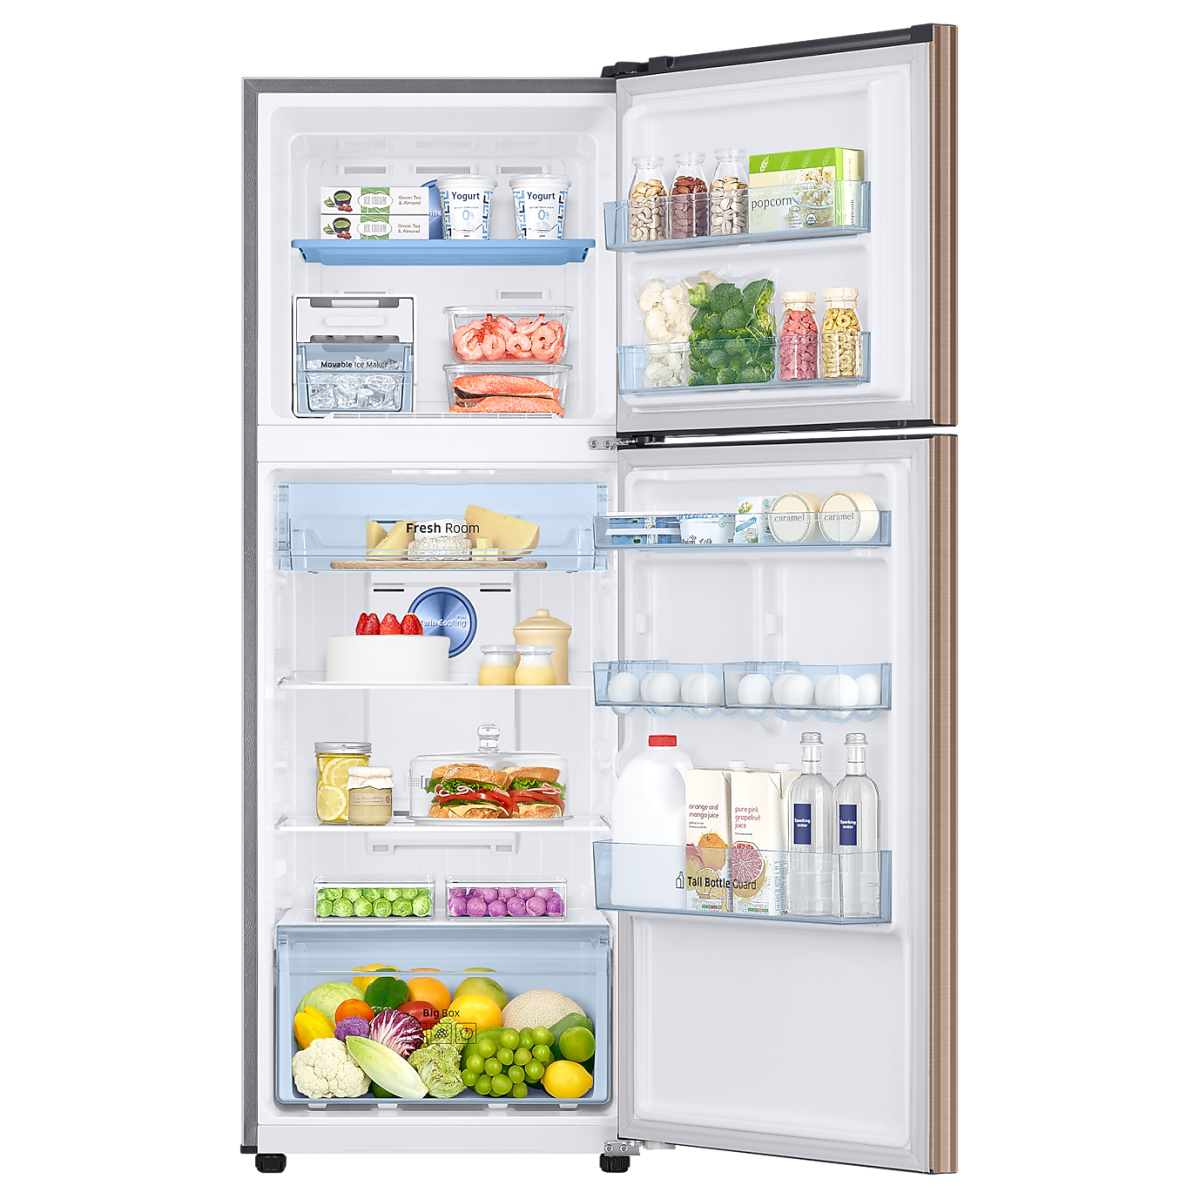 SAMSUNG 321 Liter Inverter Top Mount Refrigerator with 5 in 1 Convertible Mode RT34K5532DX/D3,Best Refrigerators of Year, Top-rated Refrigerators, Refrigerator Reviews, Refrigerator Comparison, Buying a Refrigerator Guide, Refrigerator Deals and Offers